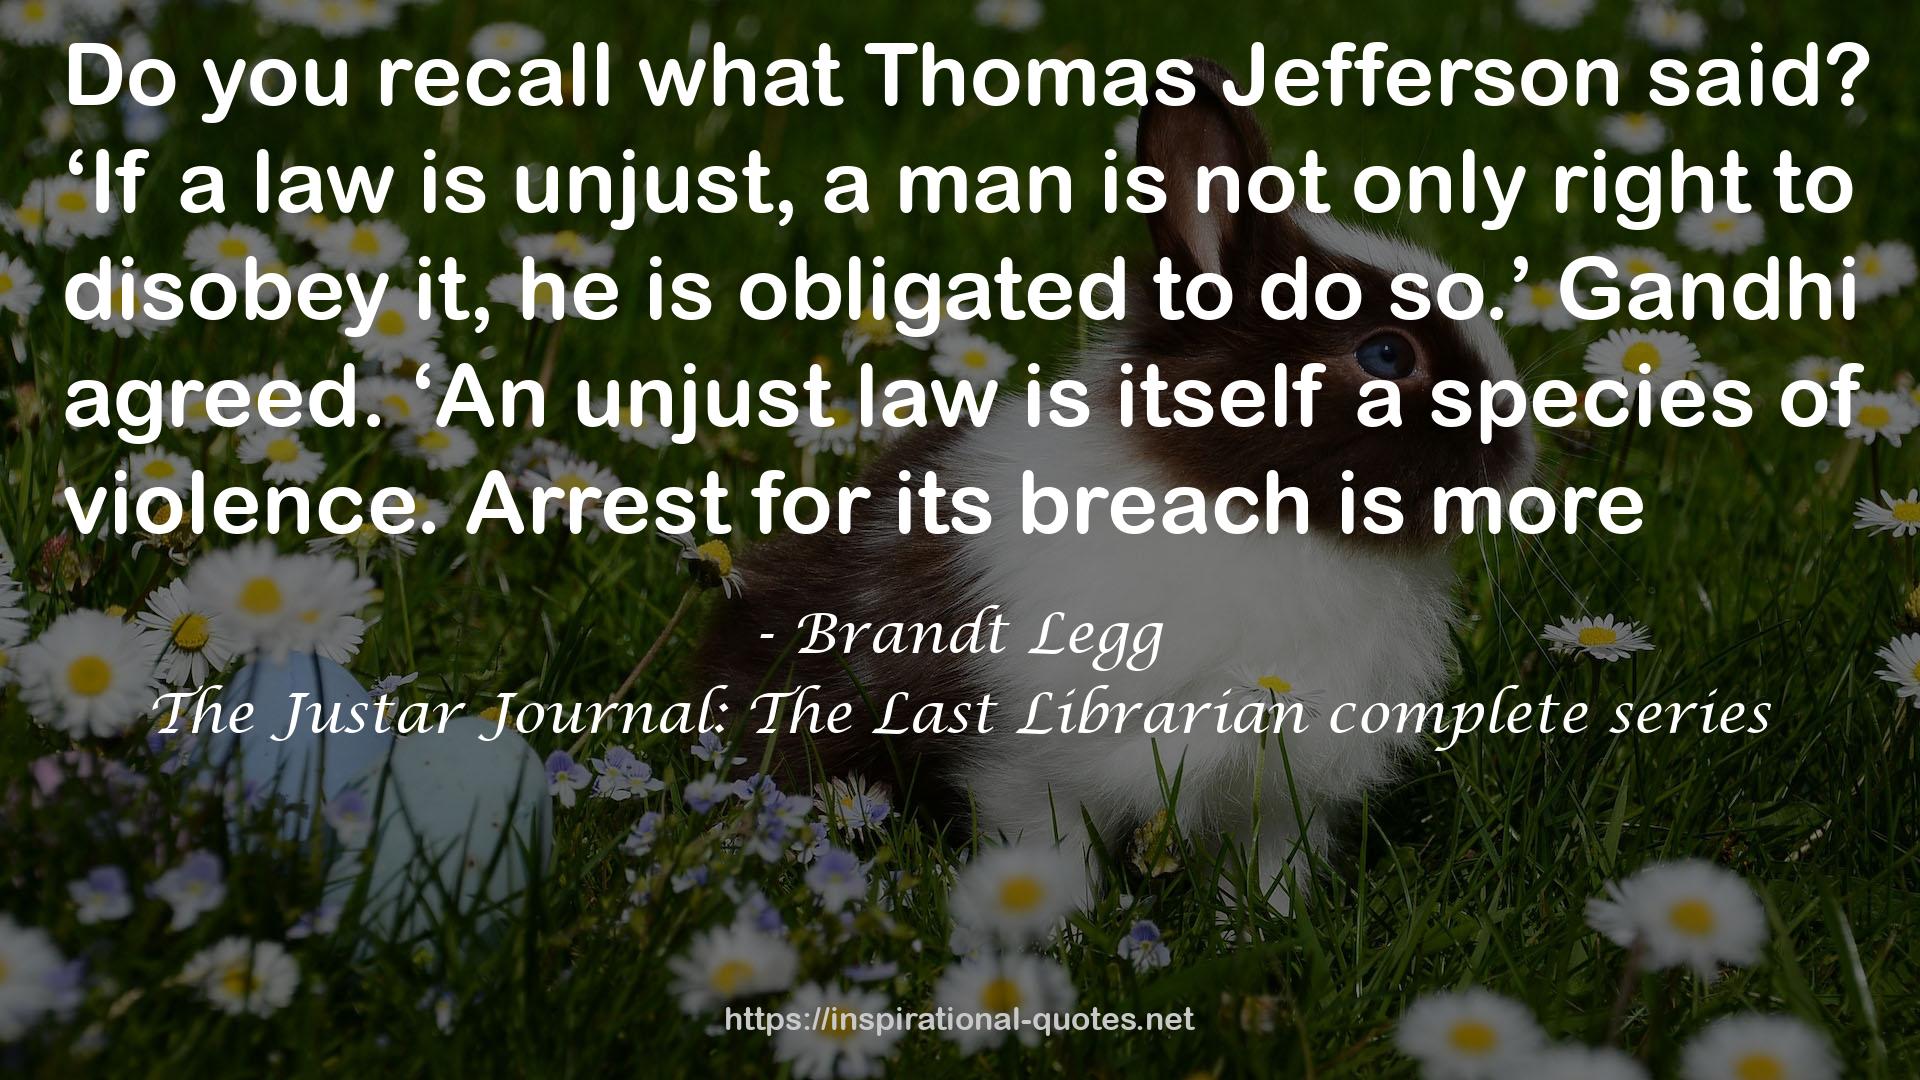 The Justar Journal: The Last Librarian complete series QUOTES